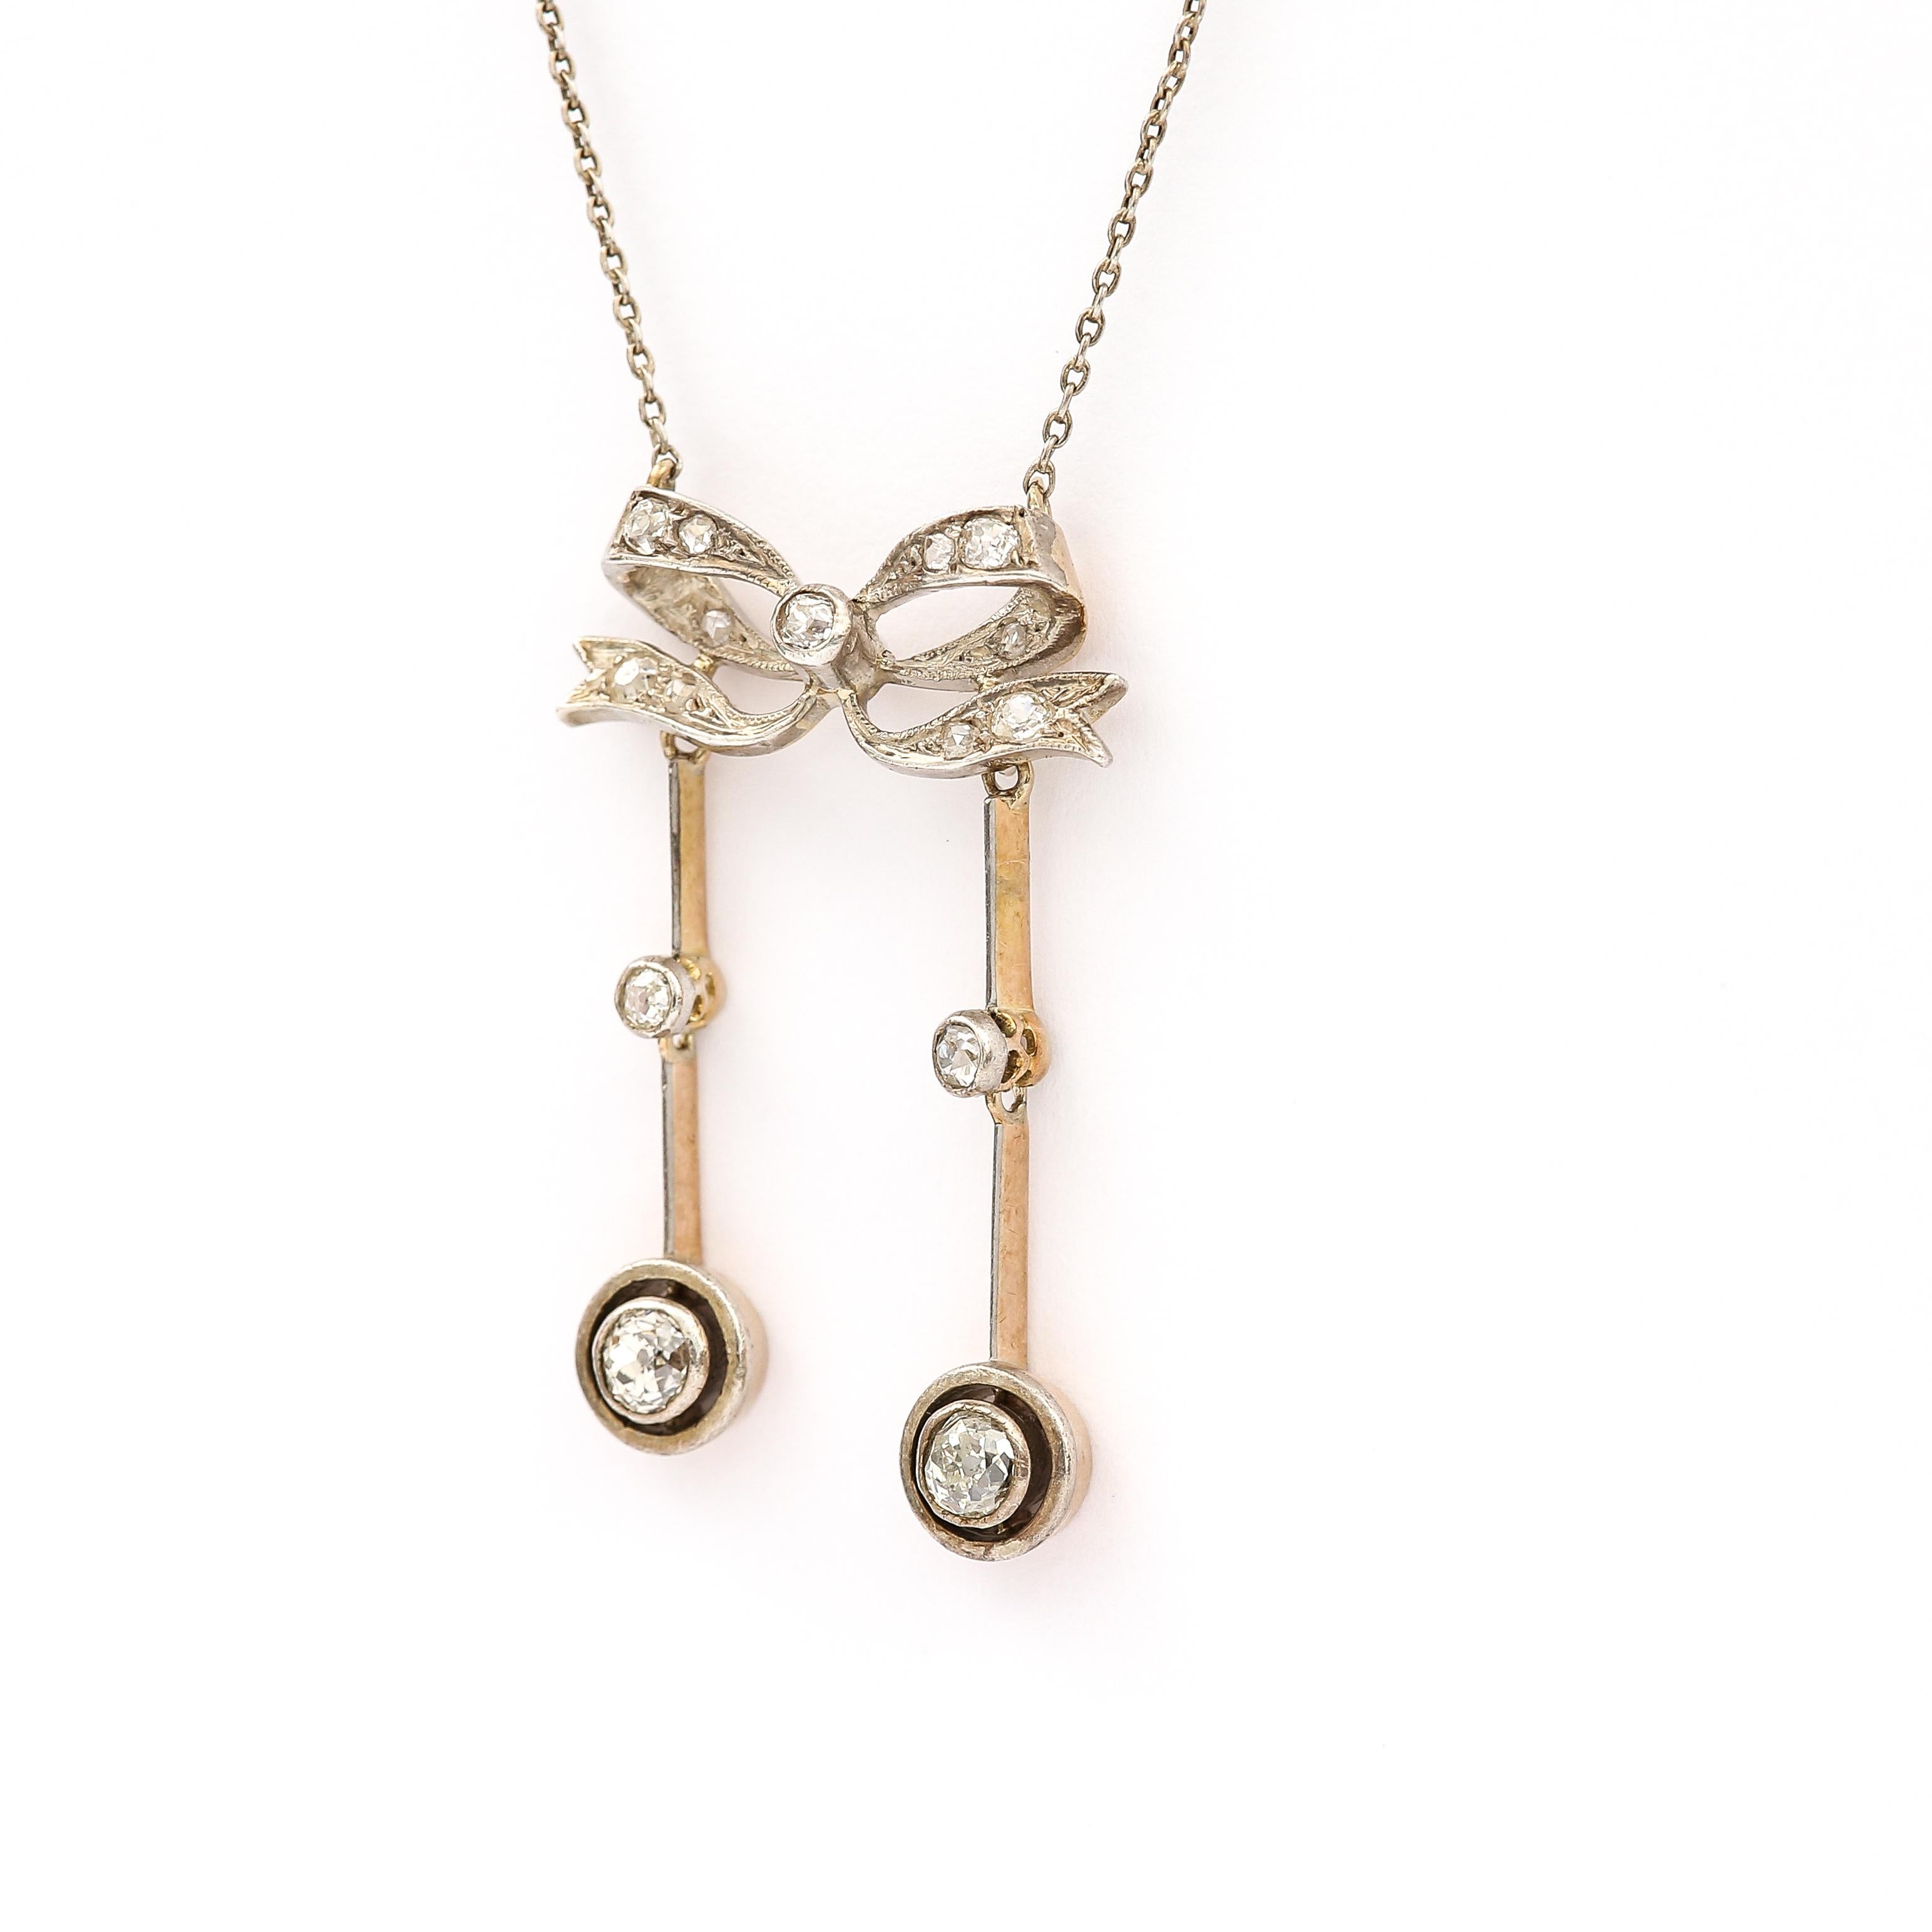 A charming Edwardian negligee diamond pendant, regarded as such because negligee or in French deshabille alluded to the sheer gown worn by ladies during this era. A negligee pendant usually consists of two unequal drops which gives this antique